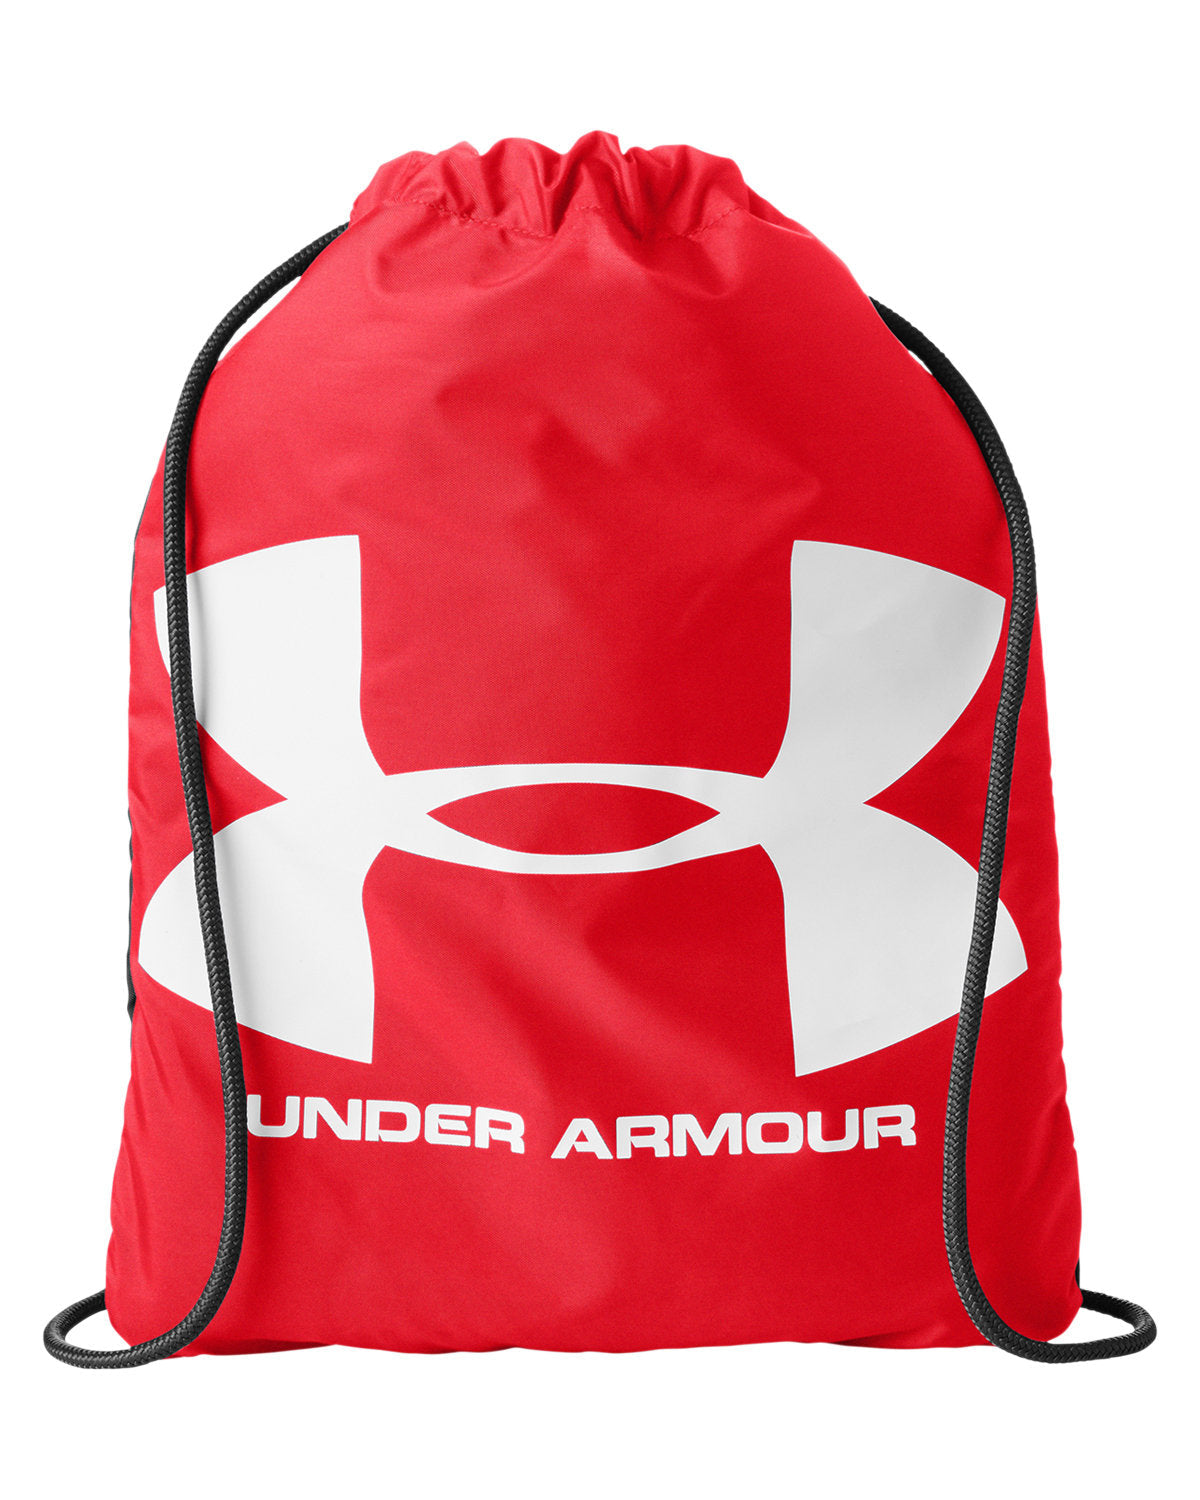 Under Armour Ozsee Sackpack RED 1240539